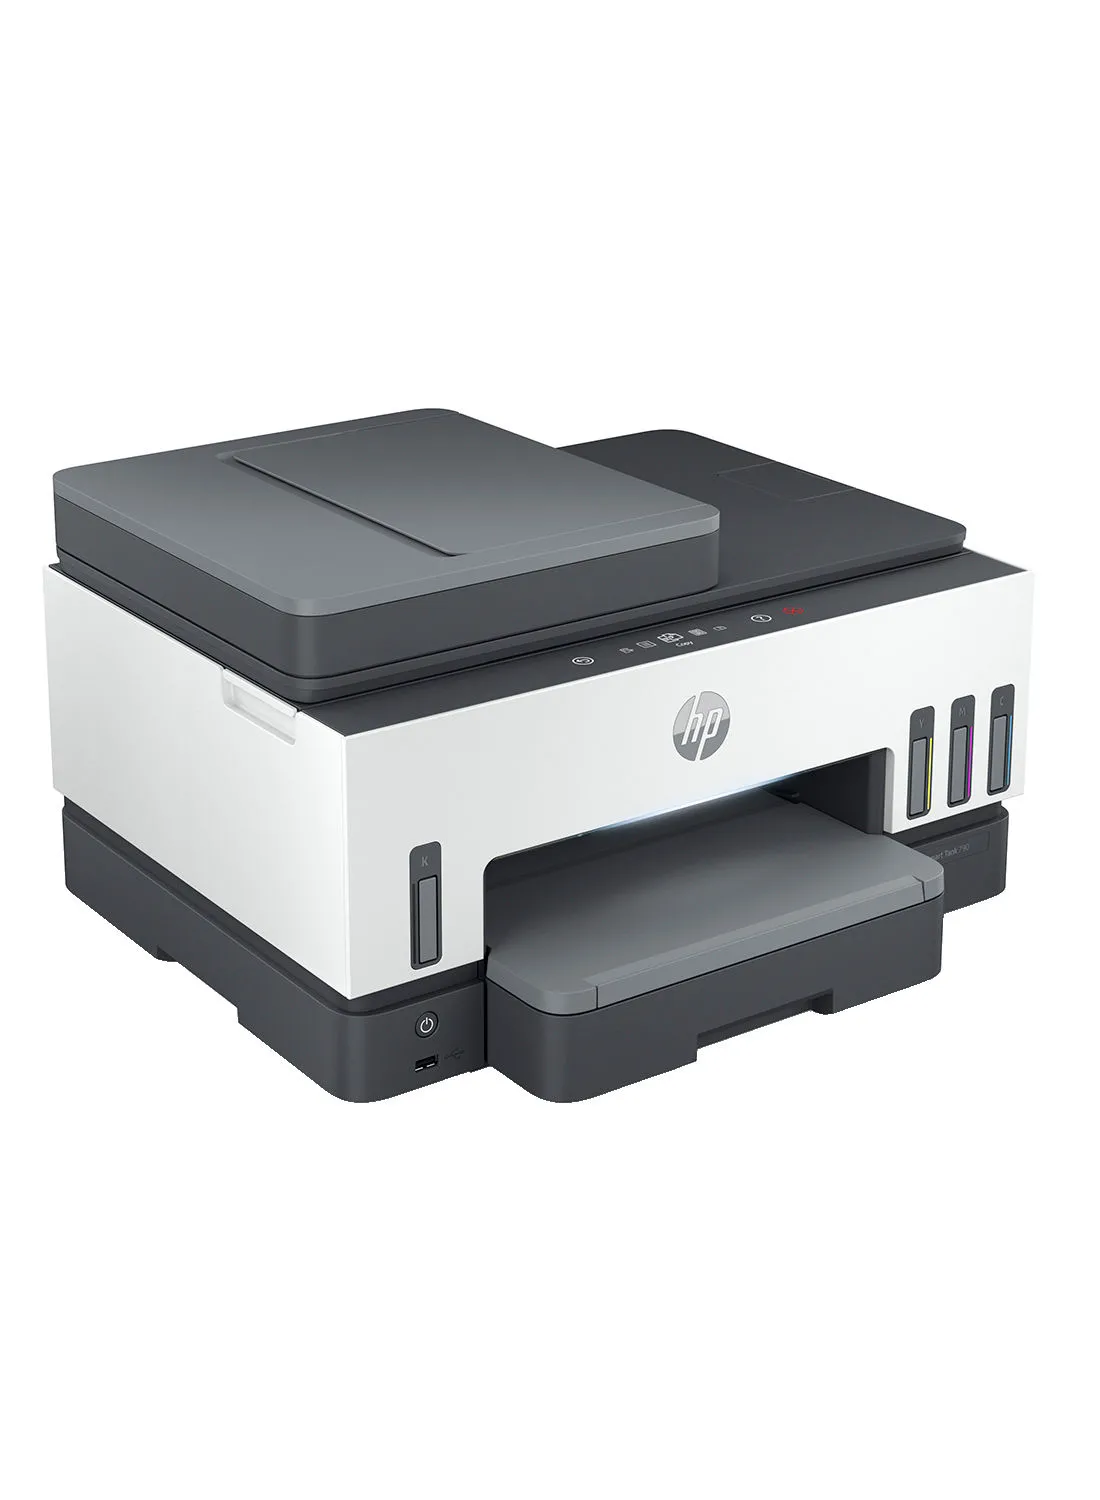 HP HP Smart Tank 790 All-in-One Printer wireless, Print, Scan, Copy, Fax, Auto Duplex Printing, Auto Document Feeder, Print up to 18000 black or 8000 color pages, White/Grey  [4WF66A] White/Grey